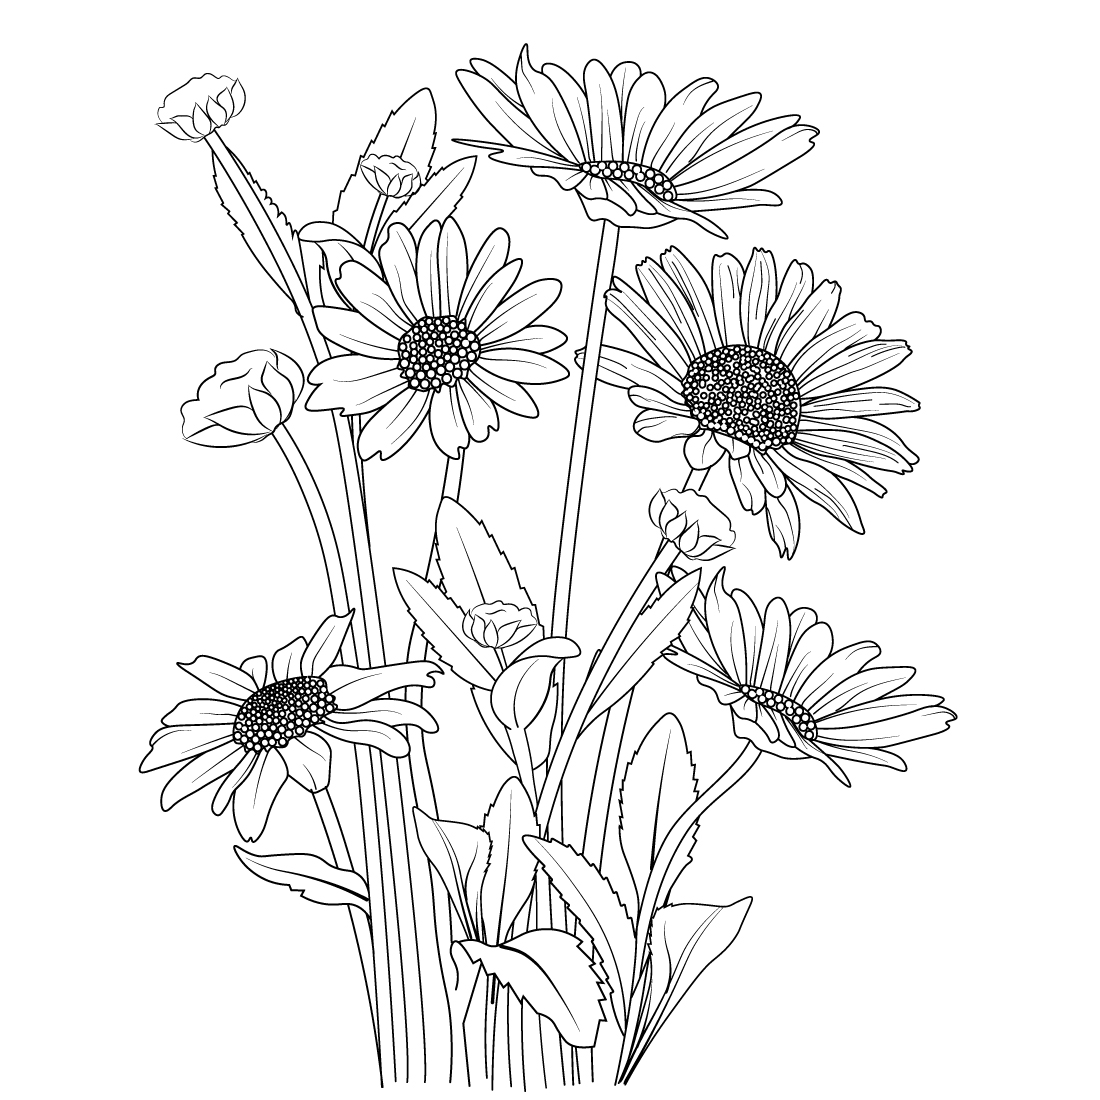 Outline Daisy flower drawing and botanical daisy flower illustration daisy vecetor art cover image.